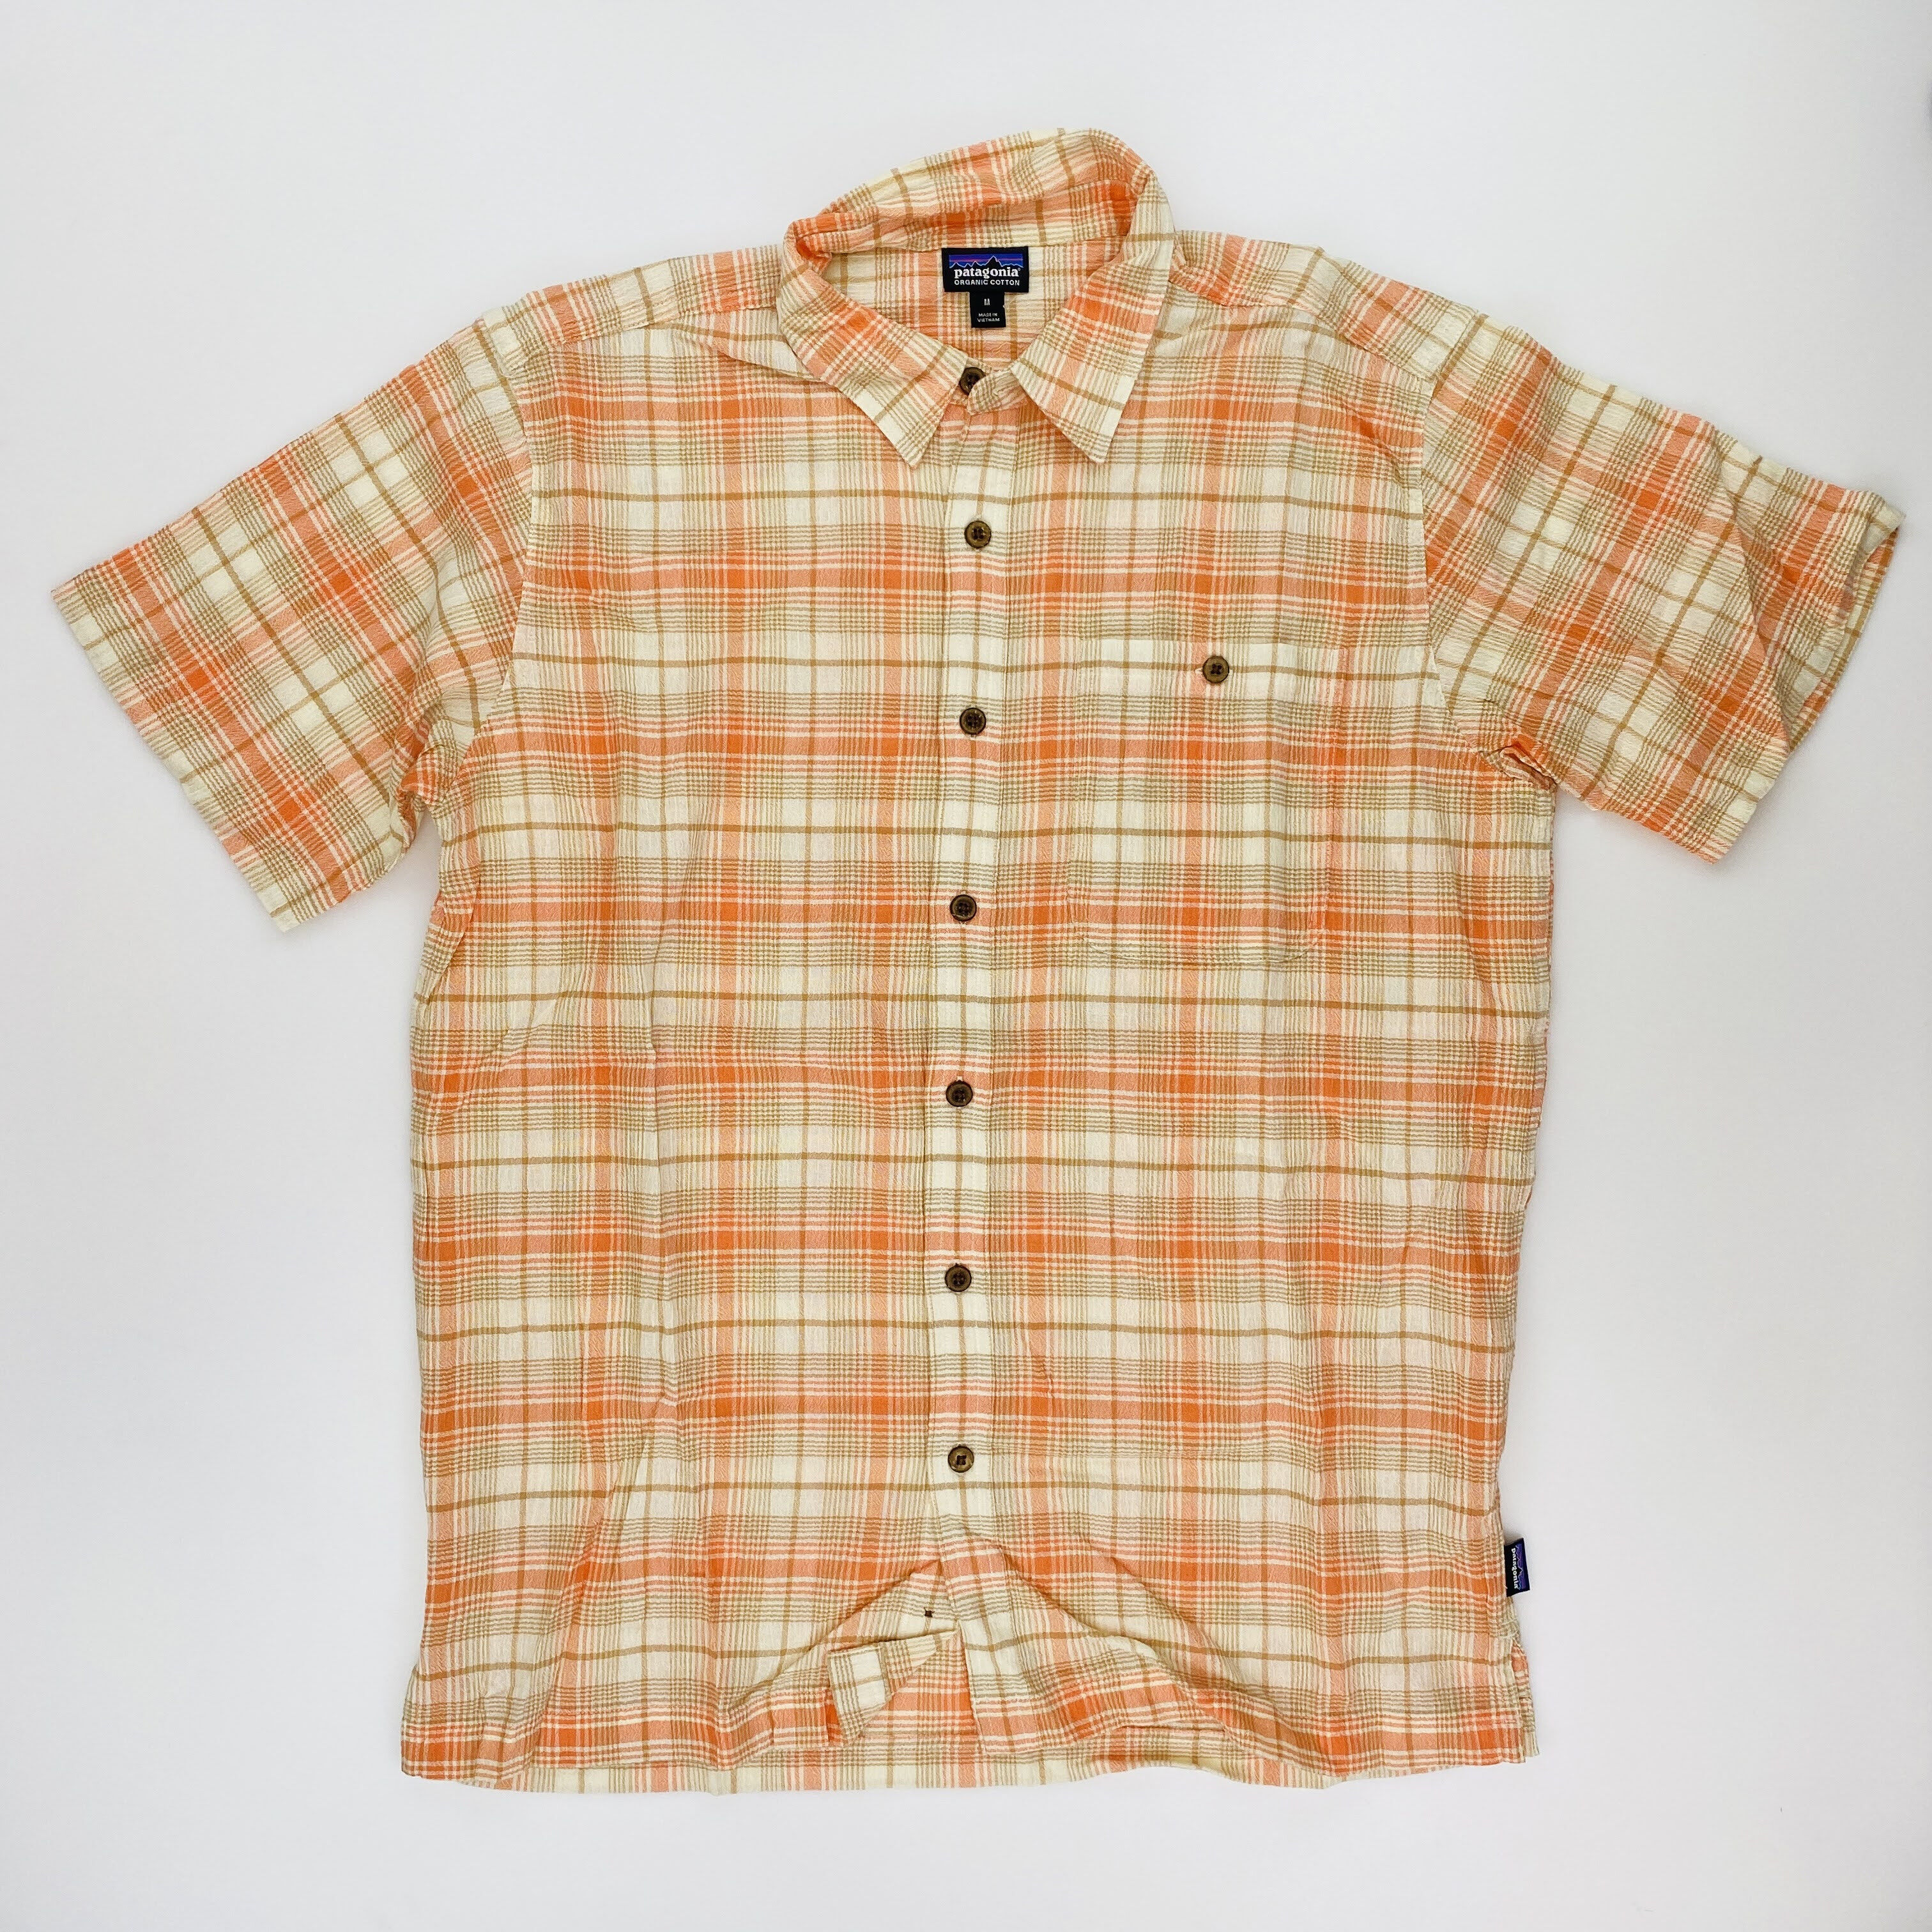 Patagonia M's A/C Shirt - Second Hand Shirt - Men's - Multicolored - M | Hardloop